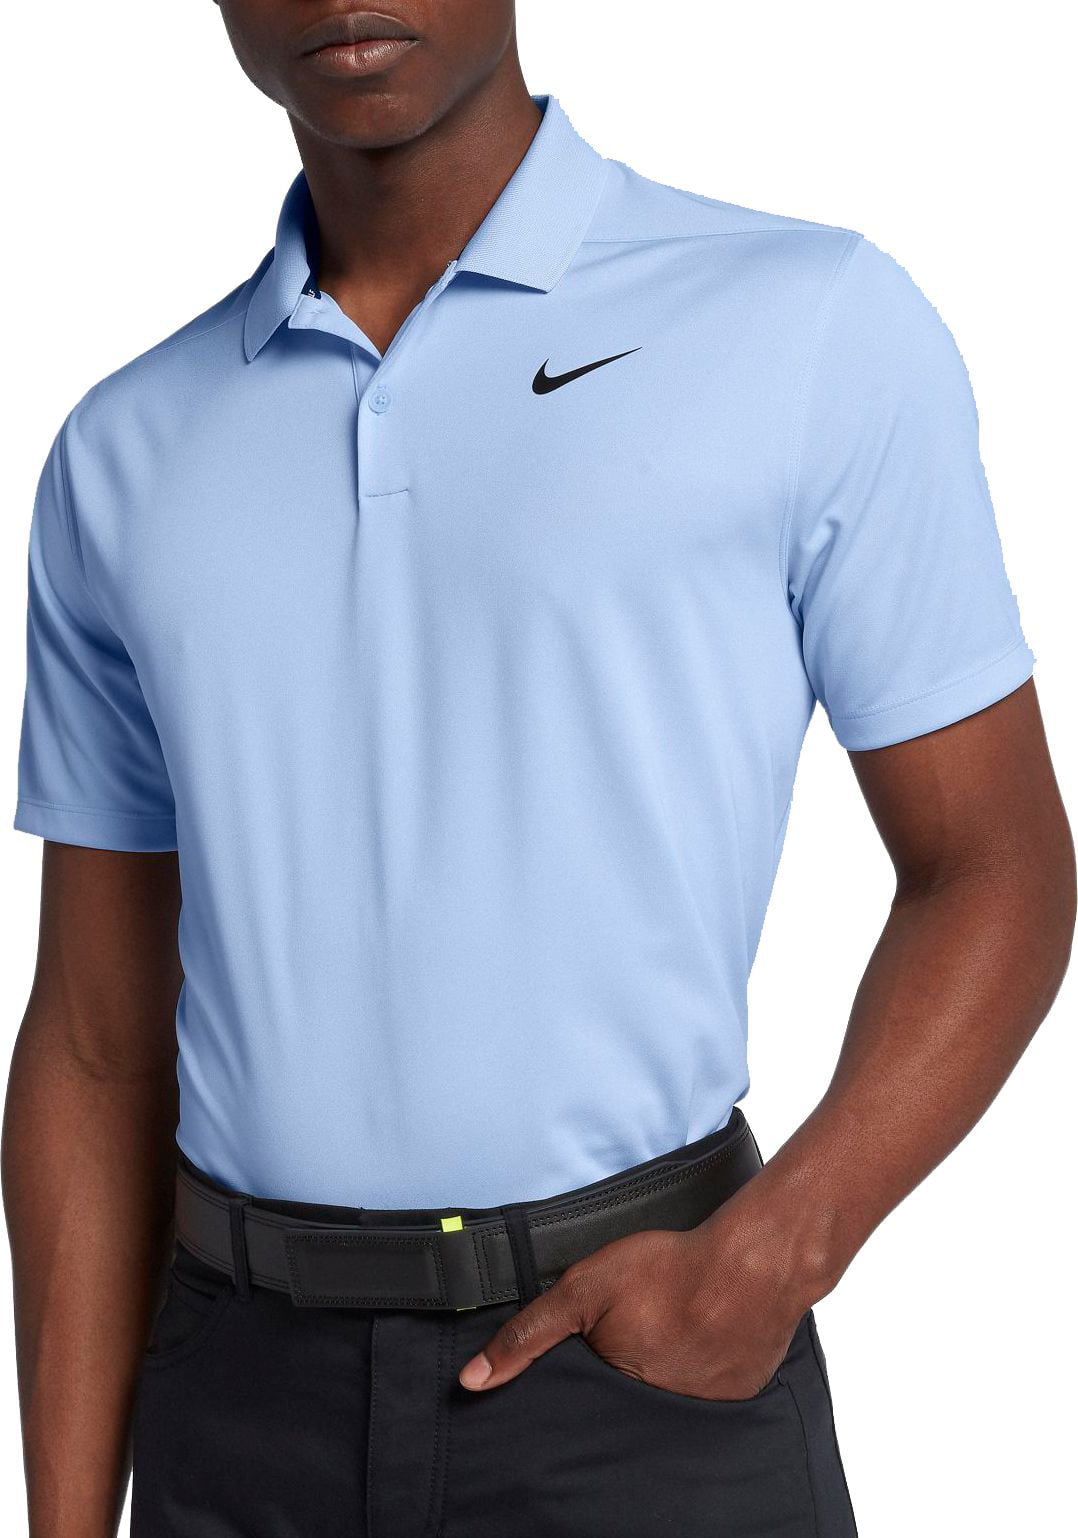 nike men's solid dry victory golf polo